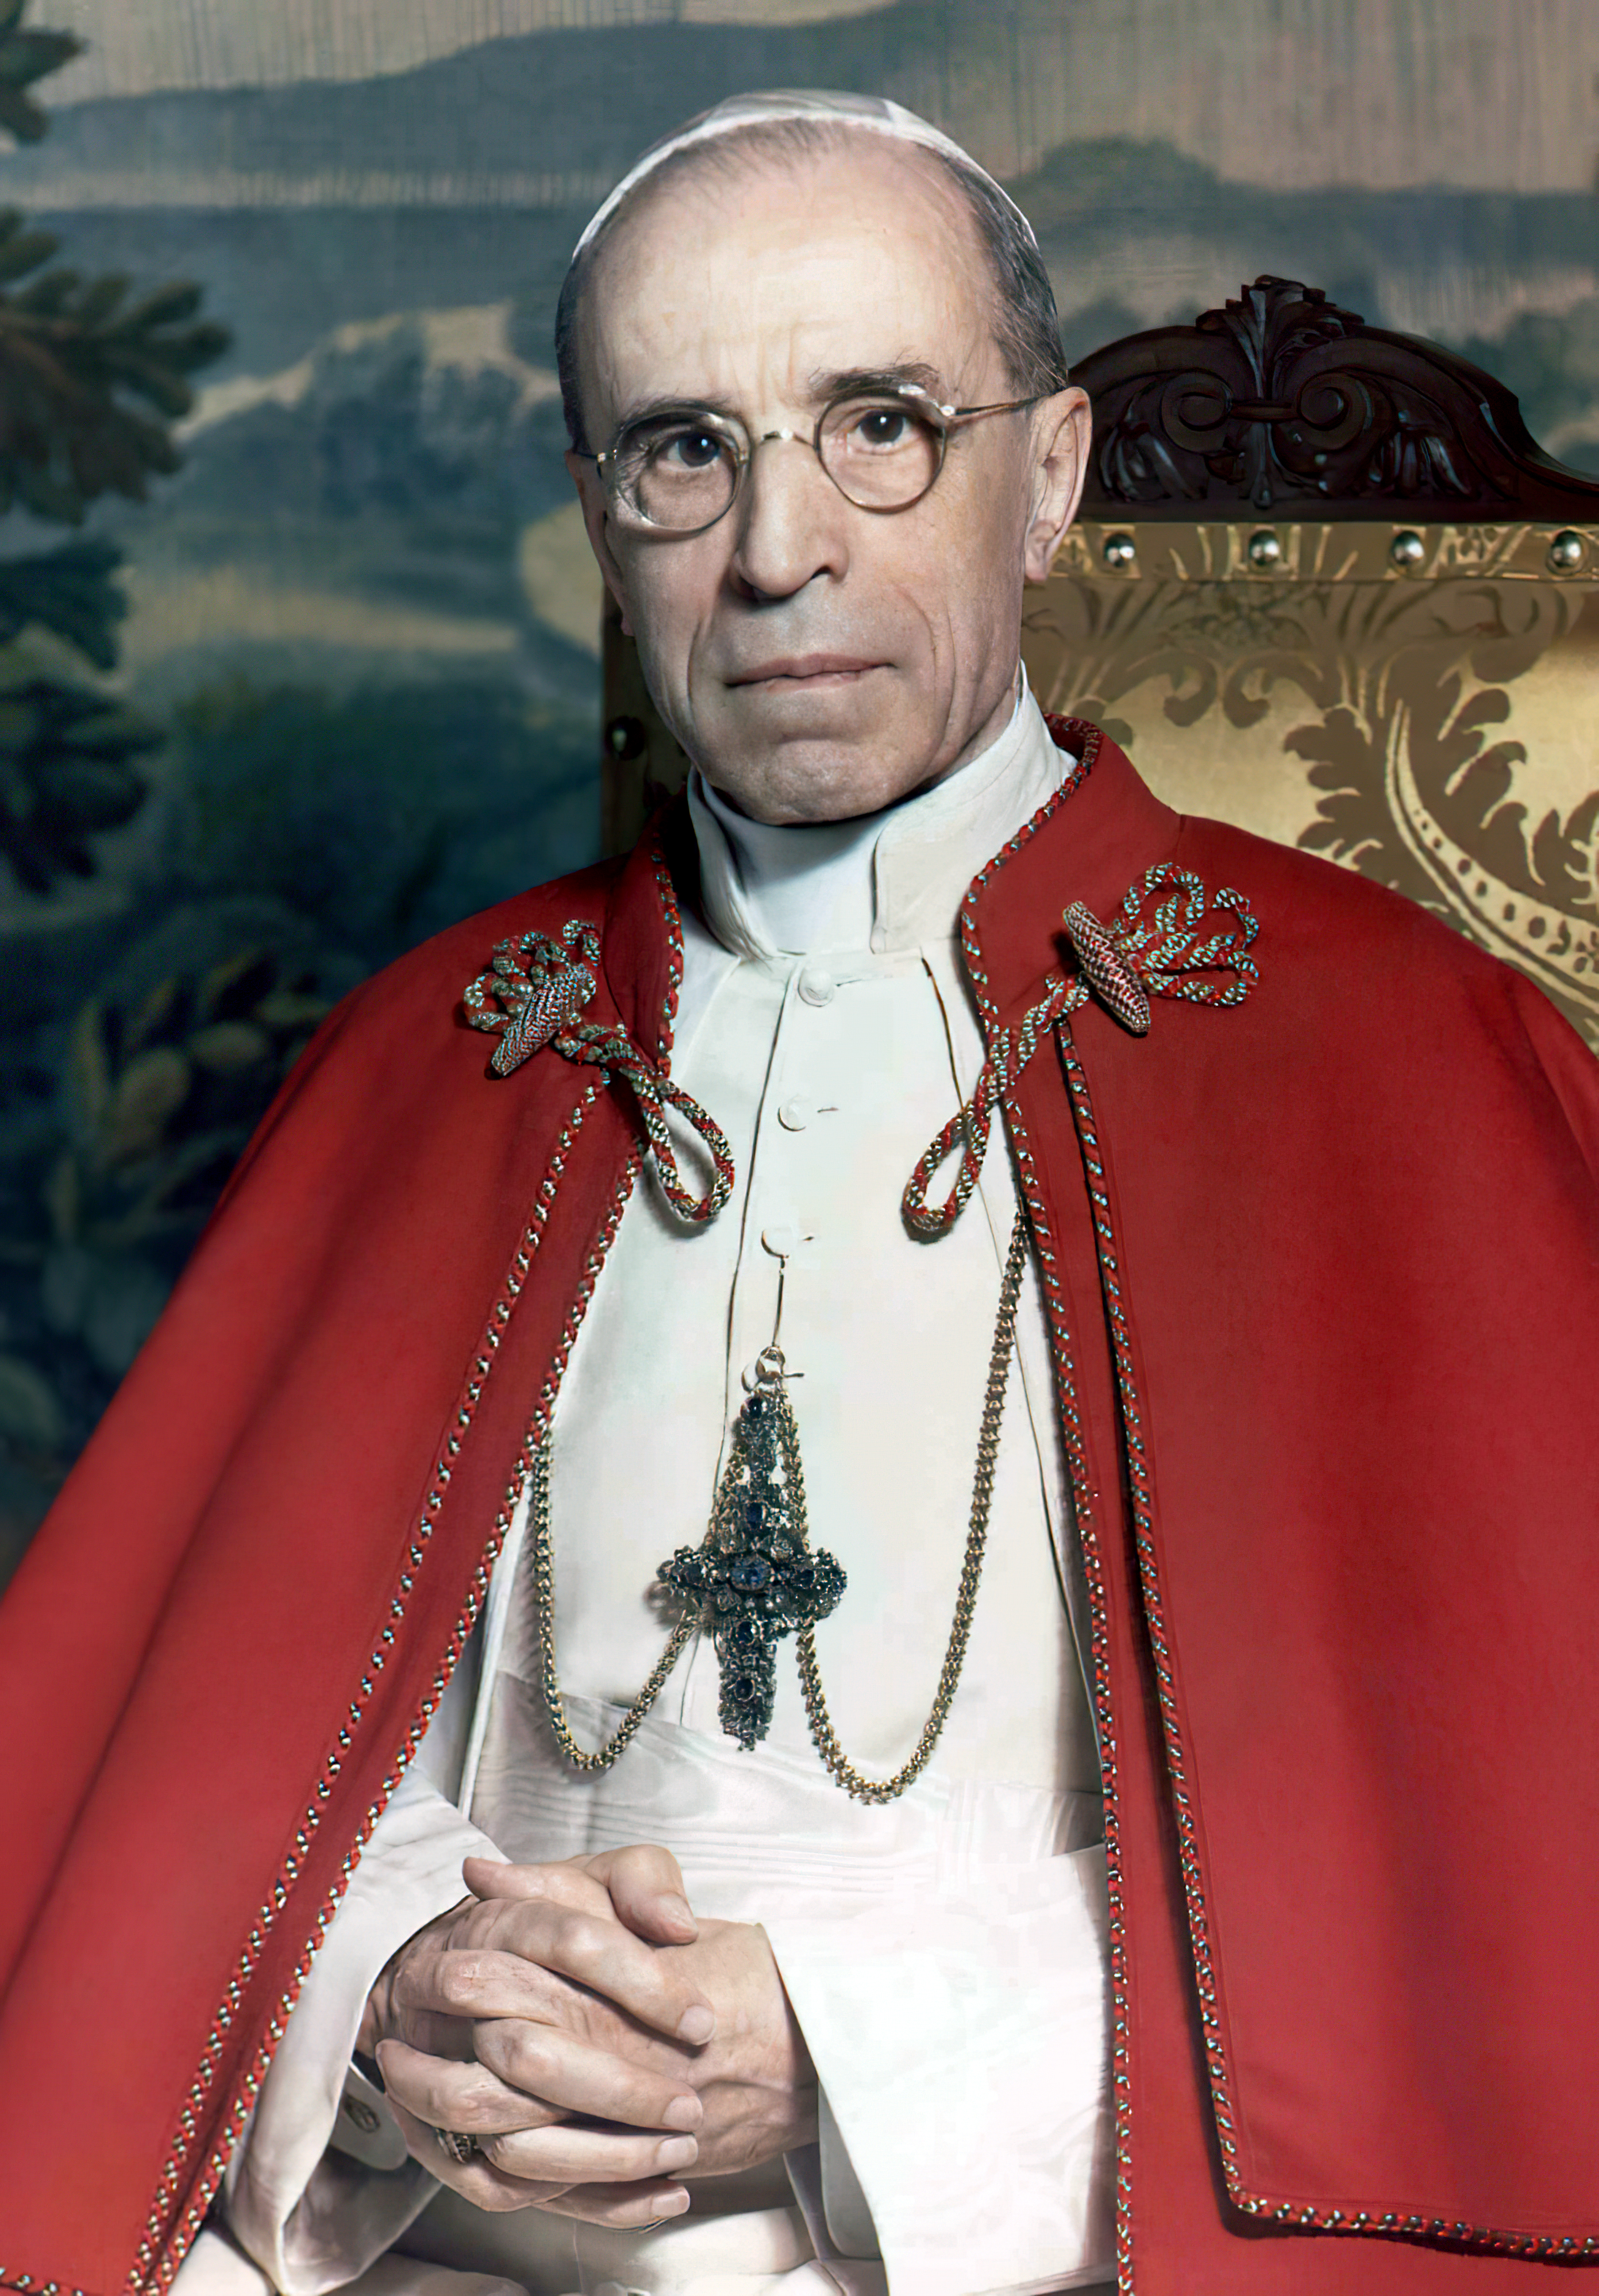 Portrait of Pius XII by Michael Pitcairn, c. 1951